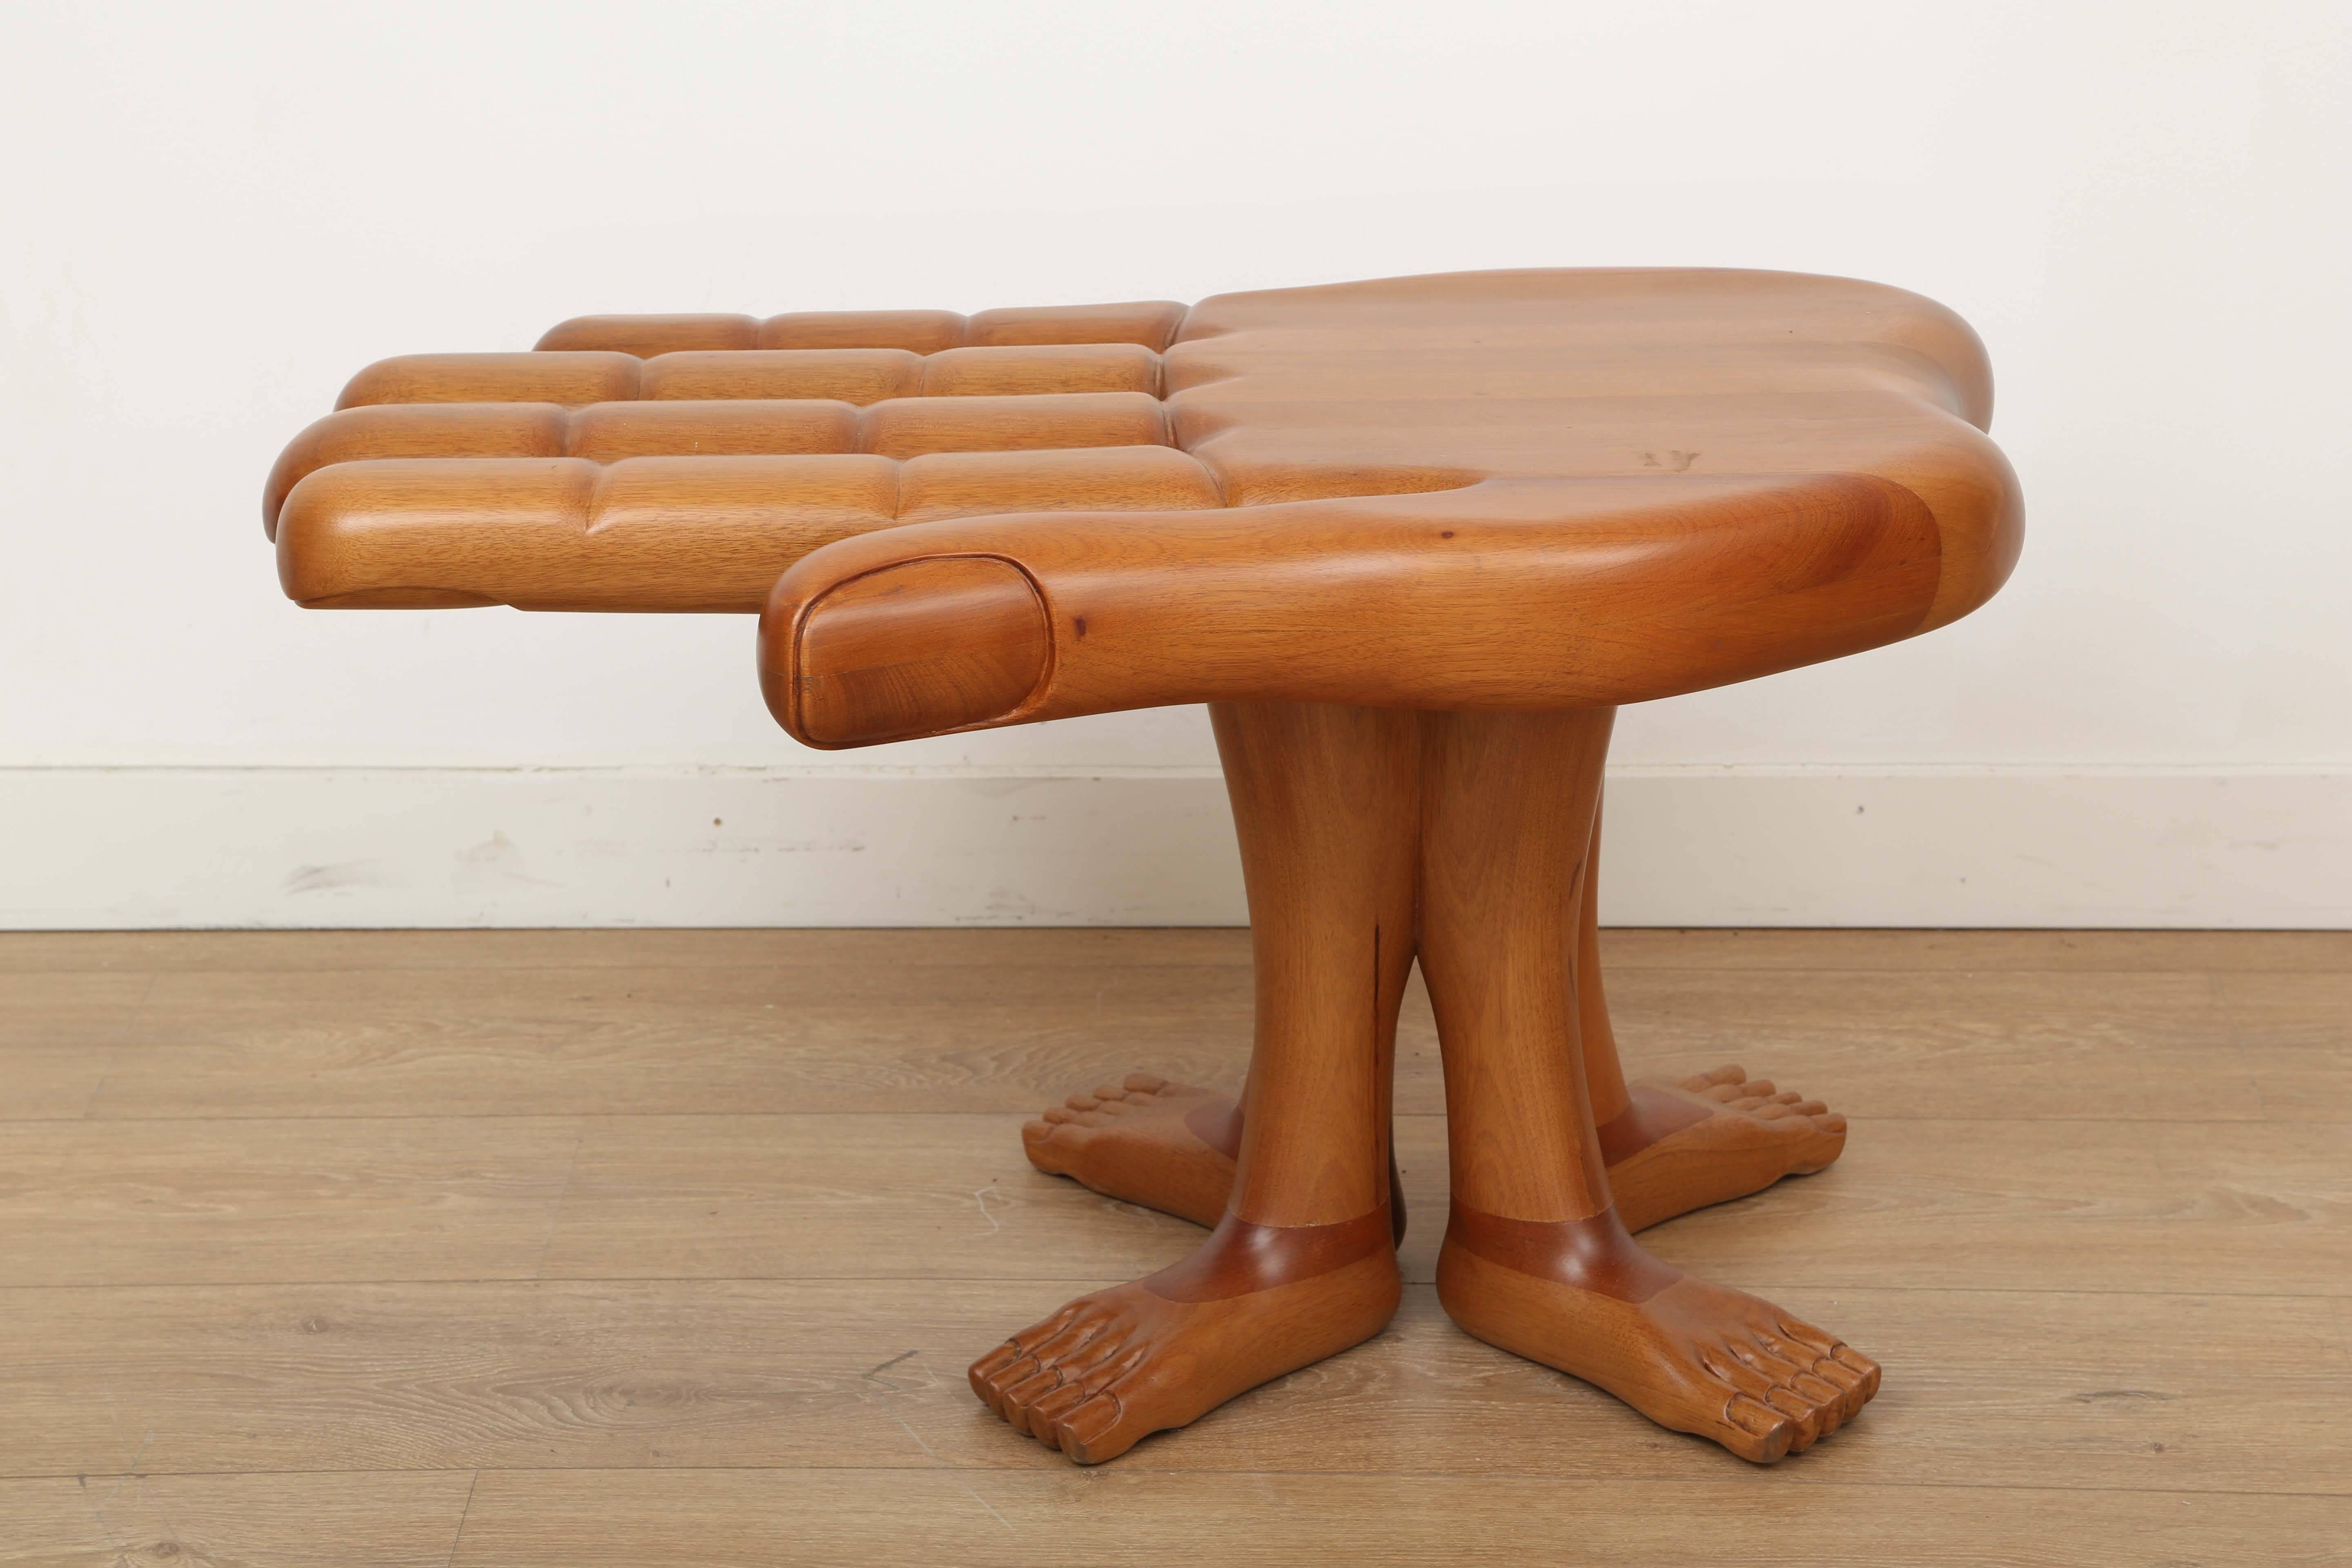 Iconic modern hand and foot side table or sculpture by Mexican surrealist artist Pedro Friedeberg. Executed and carved with laminated and blocked mahogany. Signed.